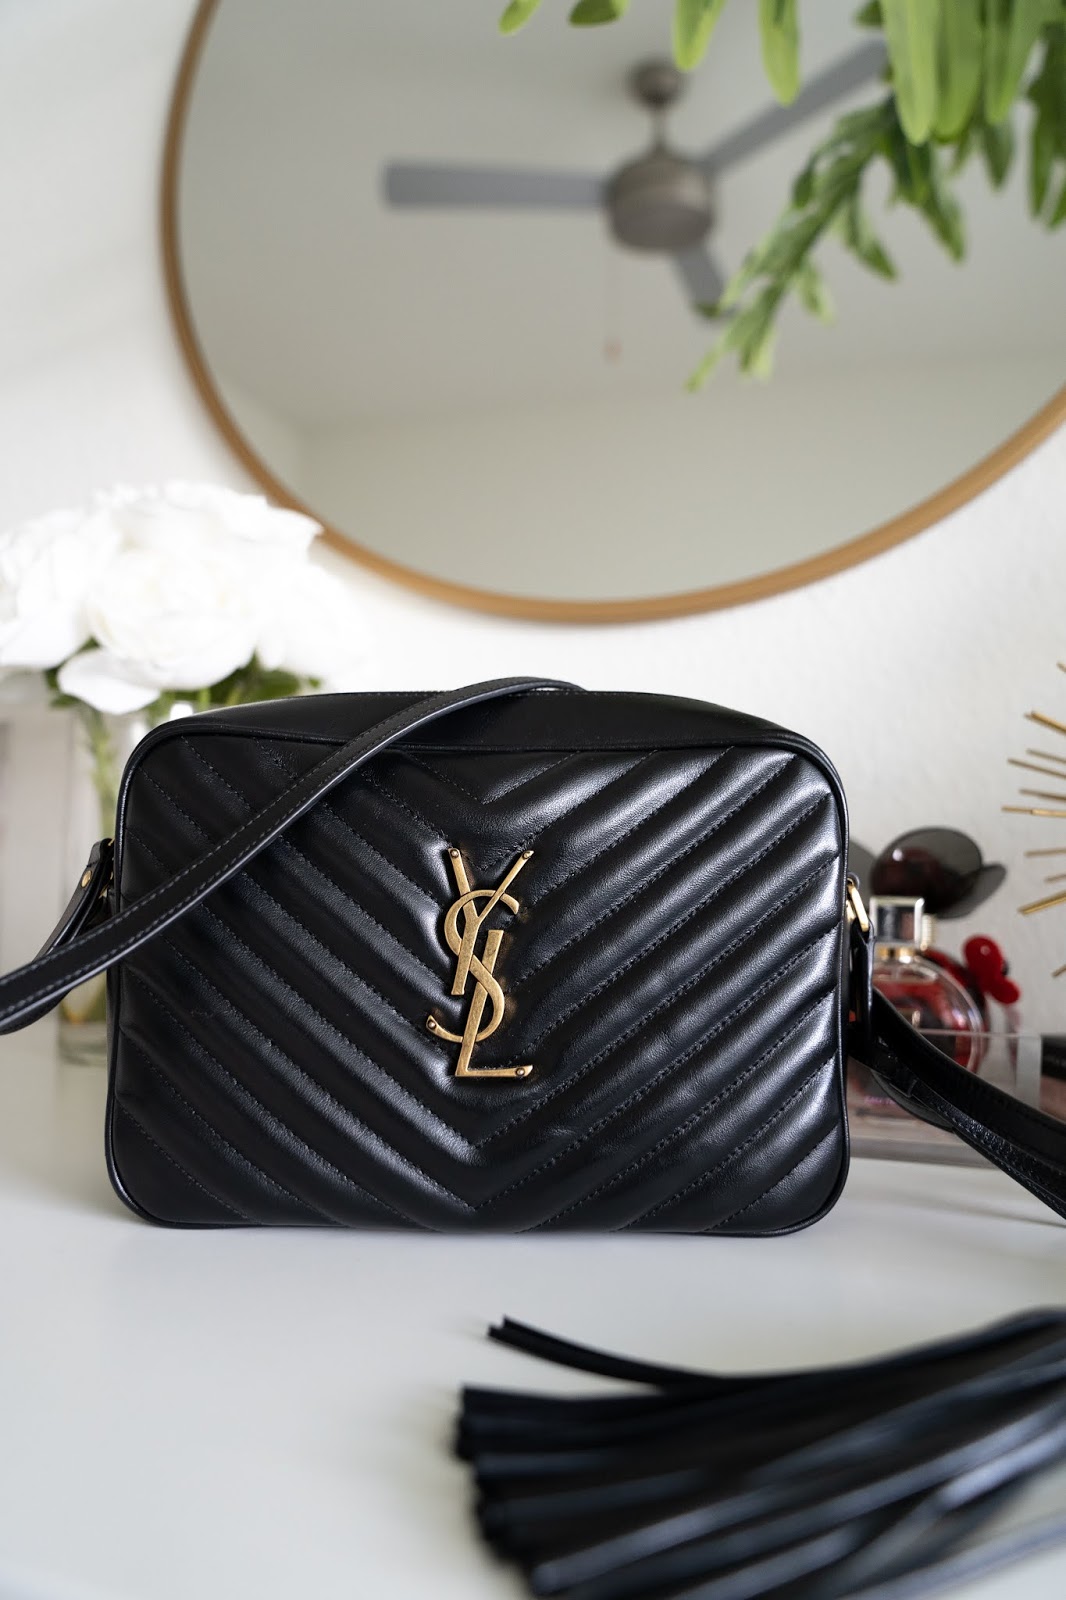 OUTFIT IDEAS FOR YSL LOU CAMERA BAG 2019 